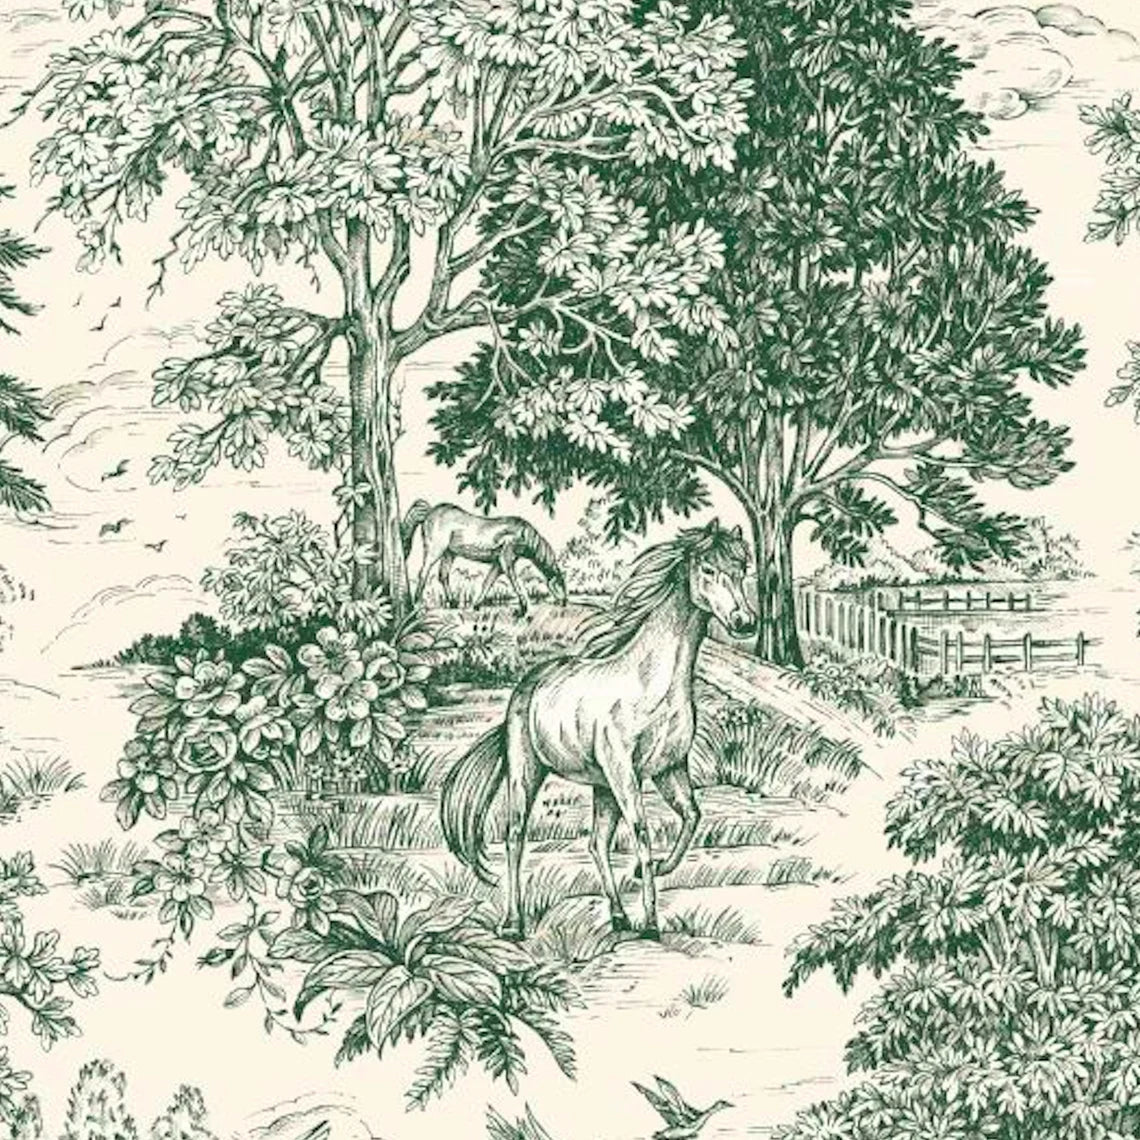 tailored tier cafe curtain panels pair in Yellowstone Classic Green Country Toile- Horses, Deer, Dogs- Large Scale